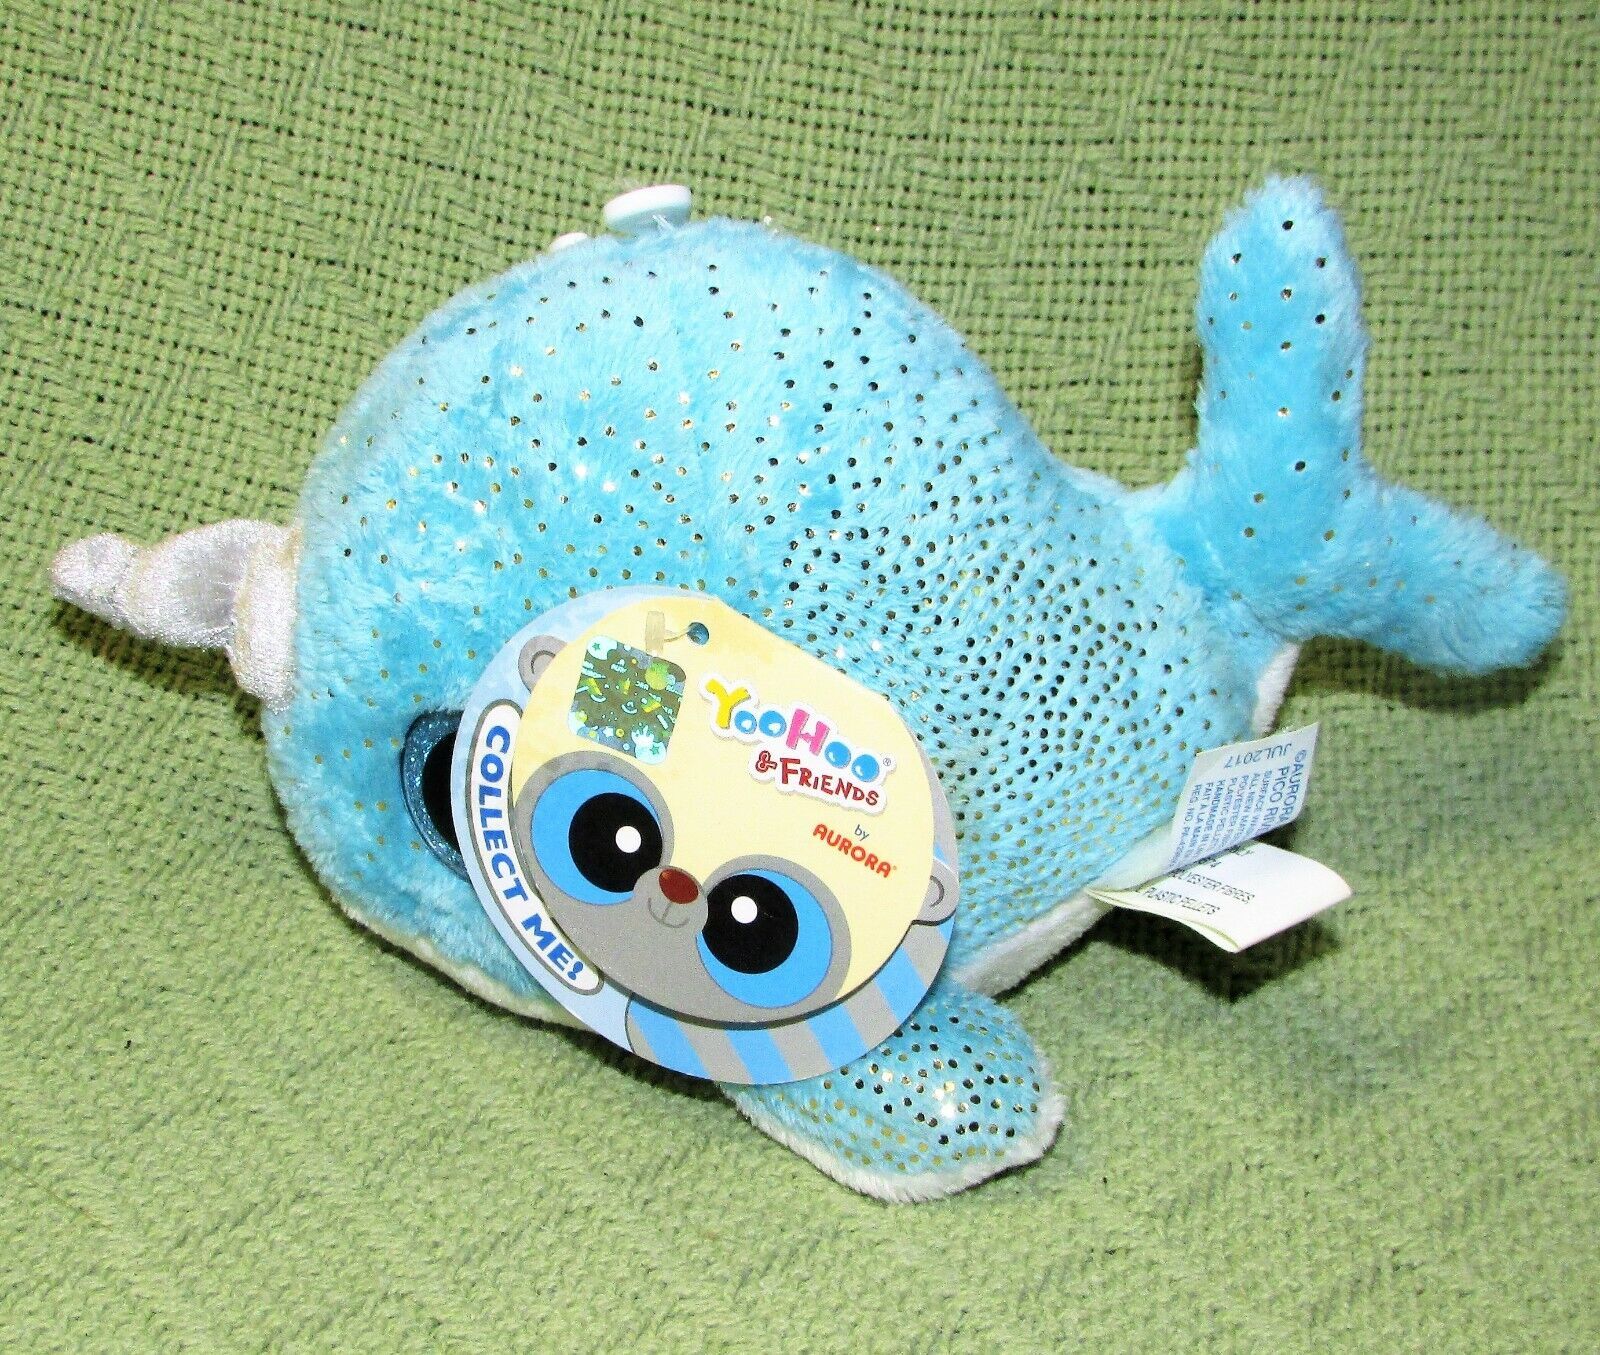 YOOHOO FRIENDS NARWHAL WITH HANG TAGS AURORA PLUSH NAREE STUFFED ANIMAL BLUE TOY - $7.20